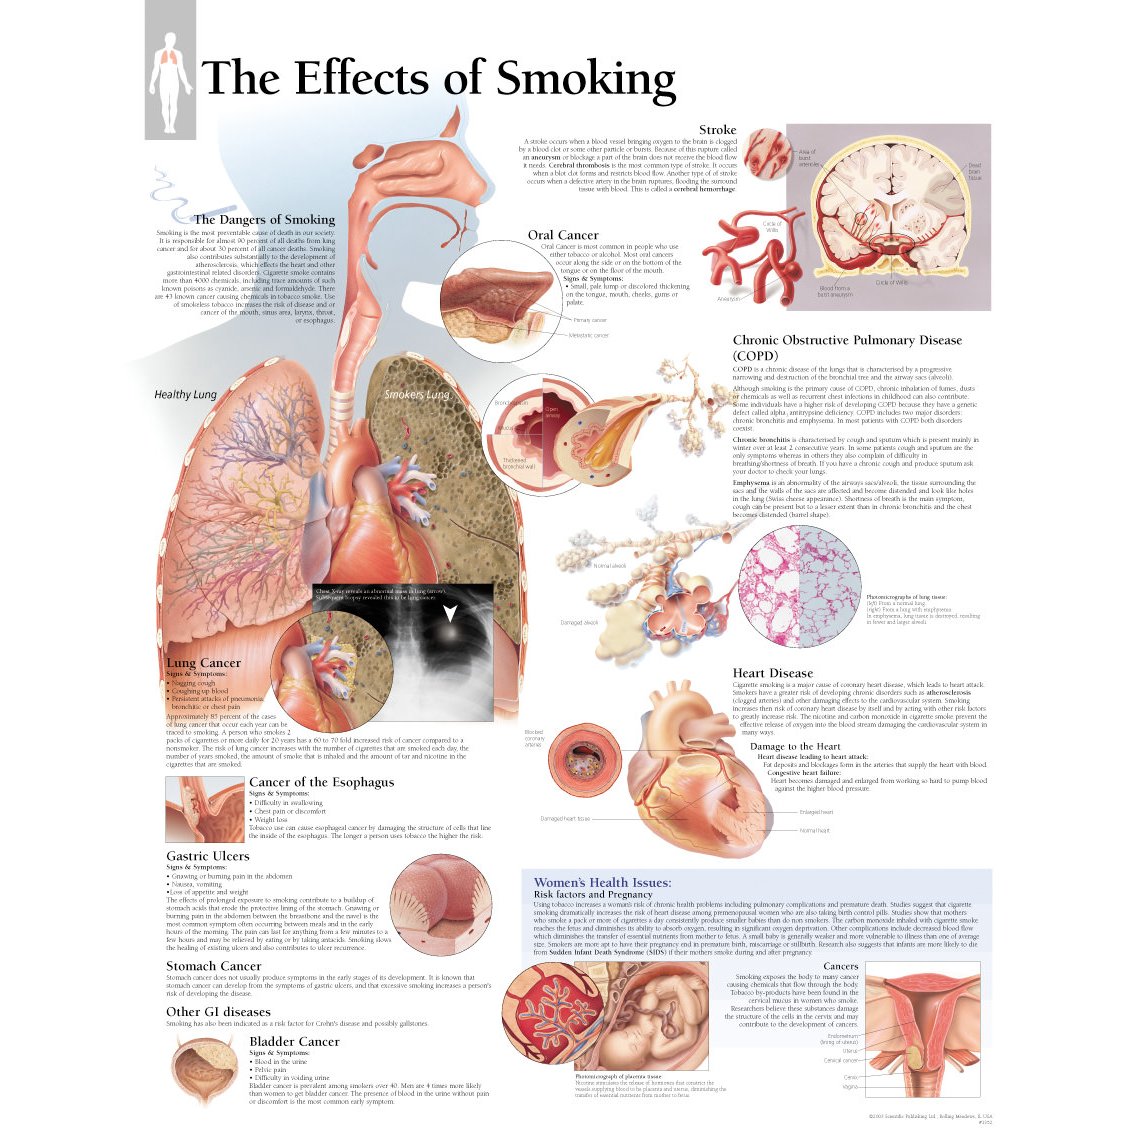 Factors associated with slim cigarette use among current smokers.